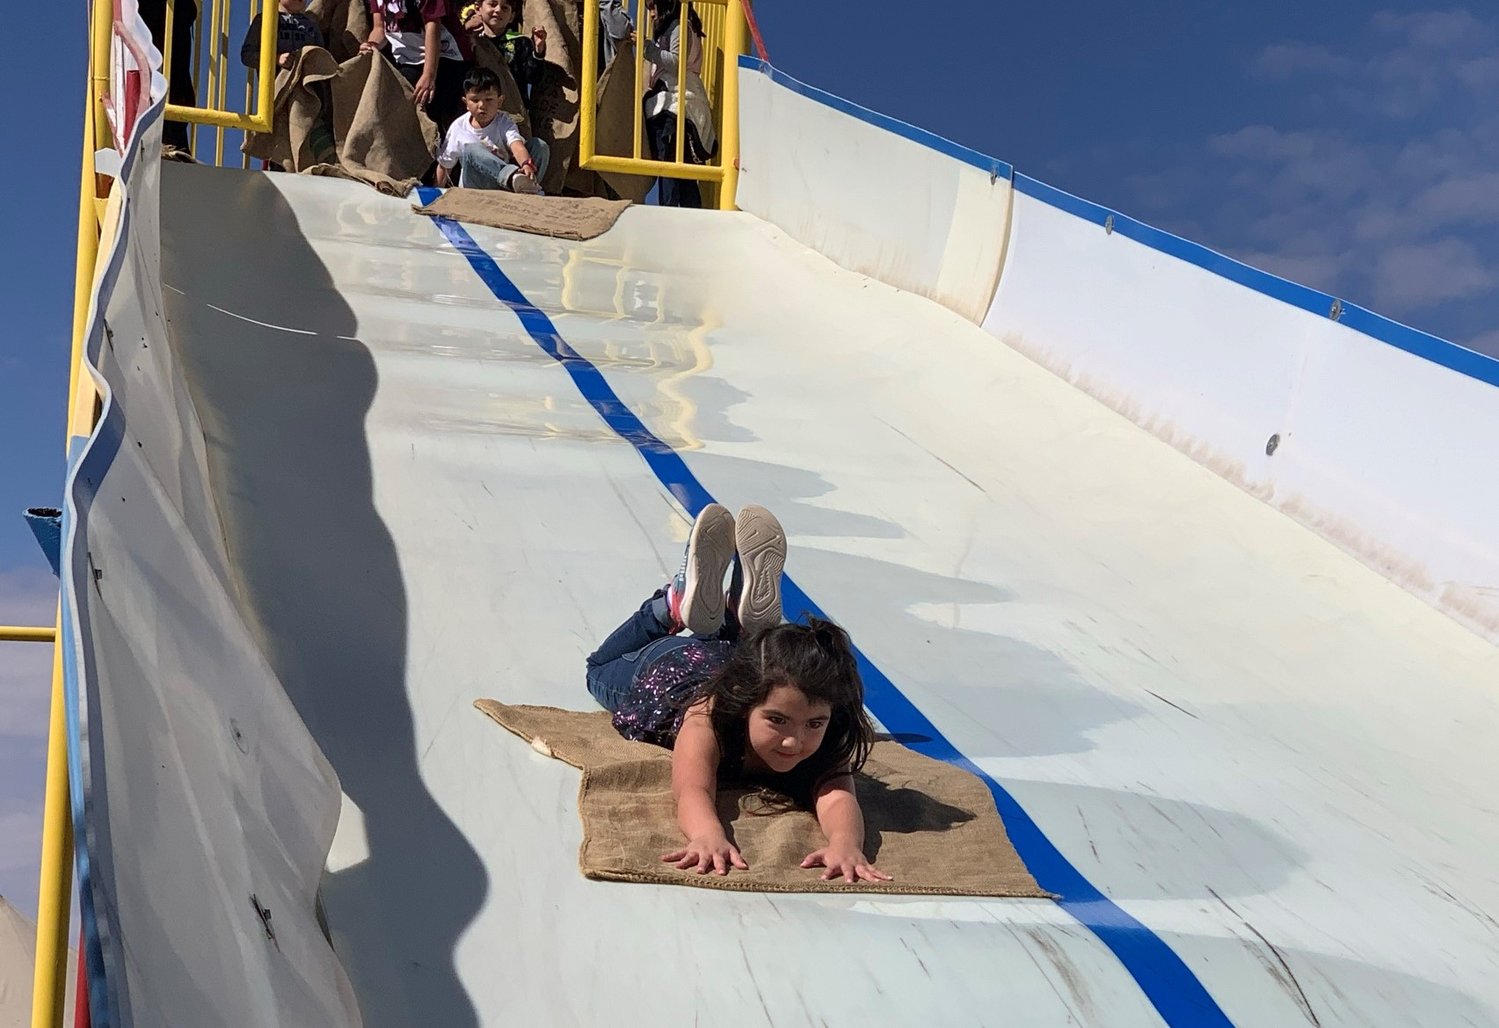 Autumn Rodriguez is focused on her destination as she slides down one of the slippery tracks at La Union Maze.